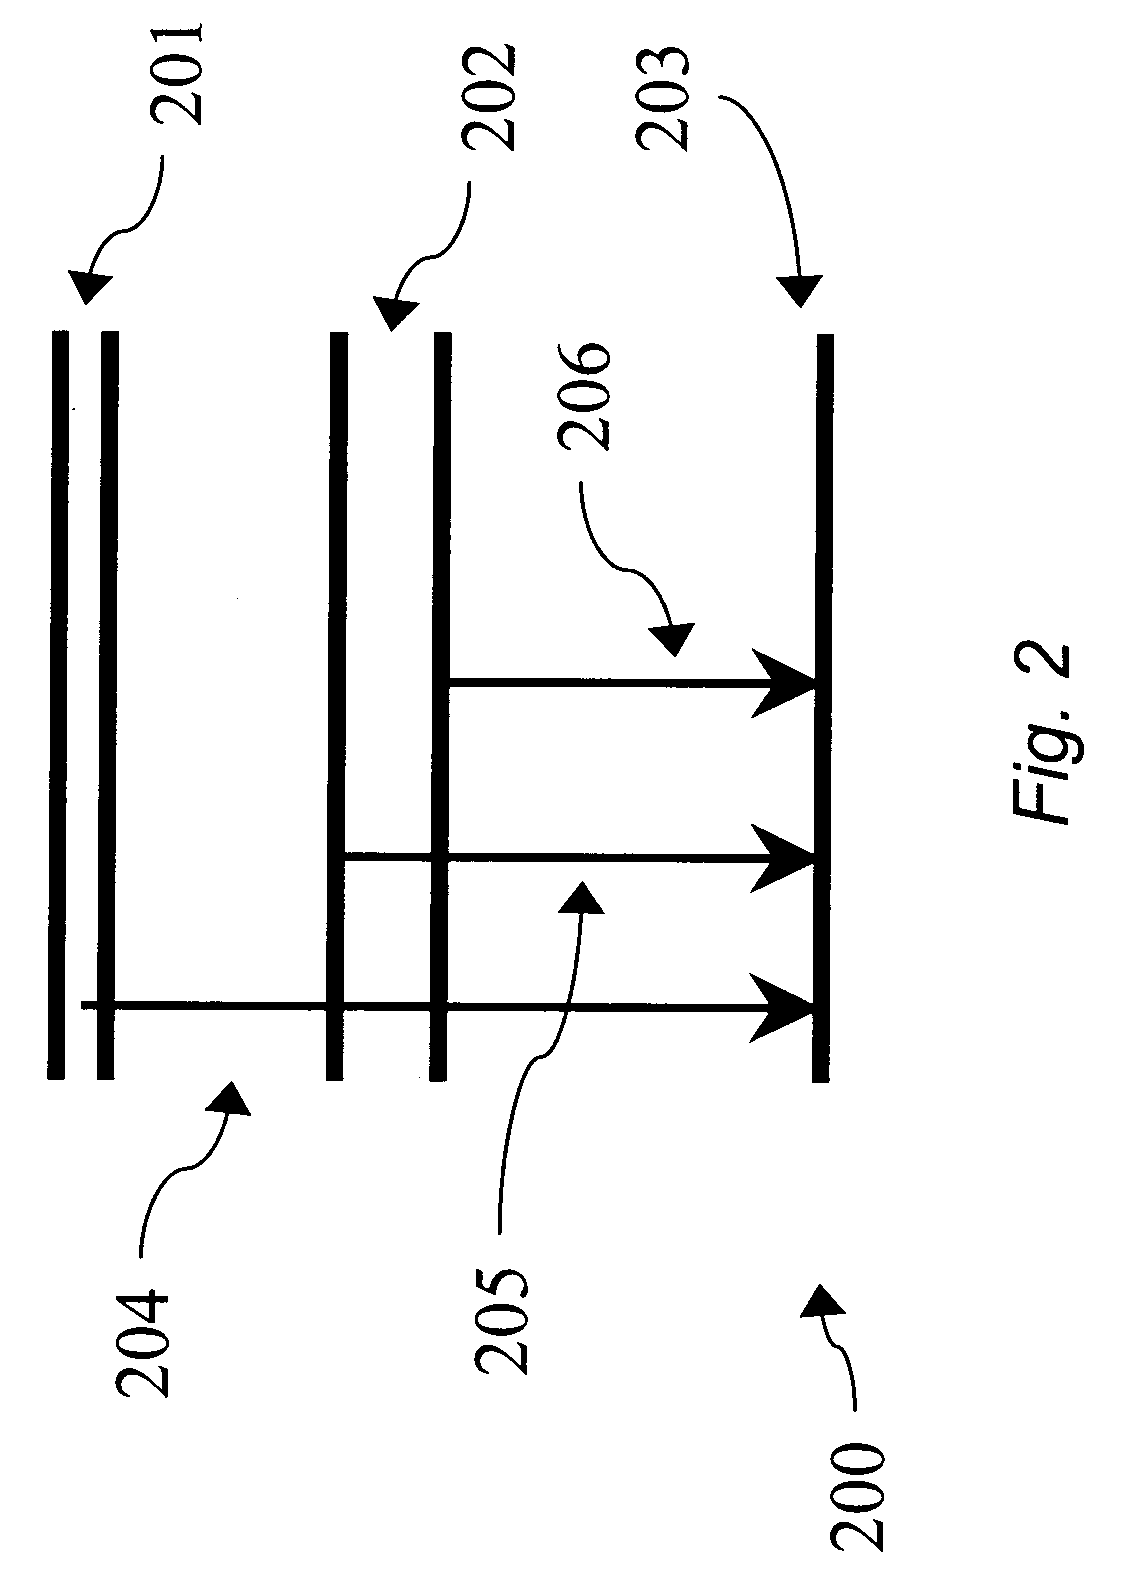 Multi-wavelength optical devices and methods of using same